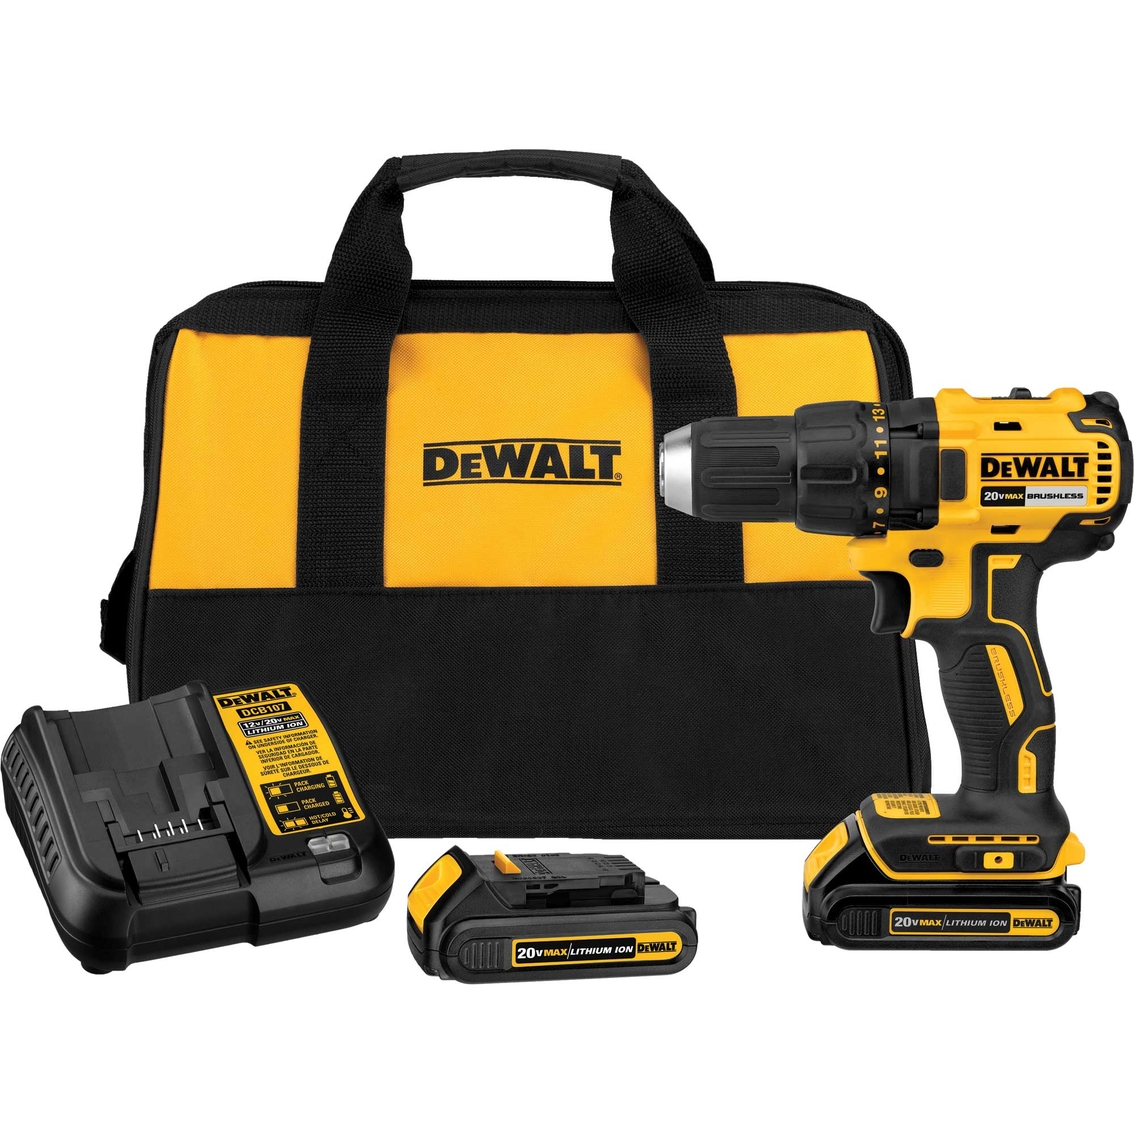 DeWalt 20V MAX* Compact Brushless Drill/Driver - Image 3 of 3